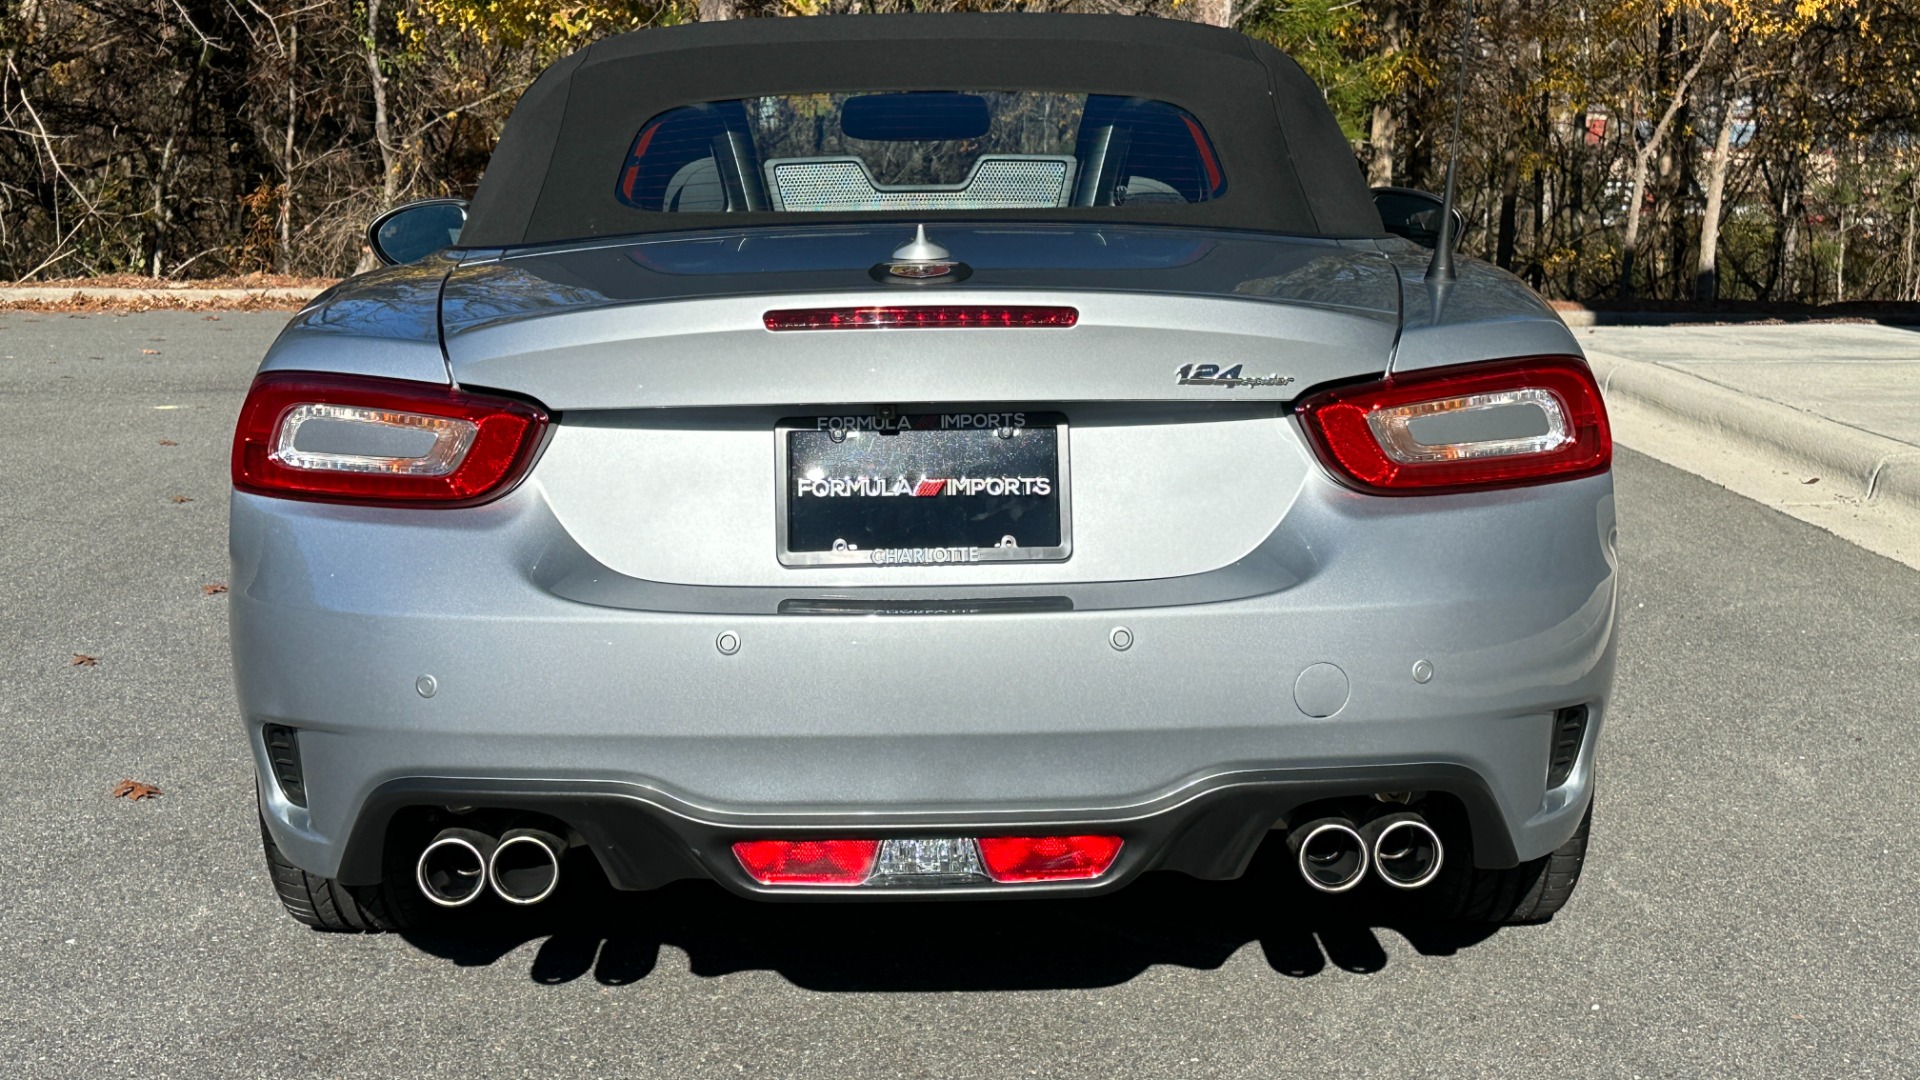 Used 2020 FIAT 124 Spider ARBARTH / MONZA EXHAUST / RECARO SPORT SEATS / BREMBO BRAKES / 6 SPEED for sale $29,995 at Formula Imports in Charlotte NC 28227 9